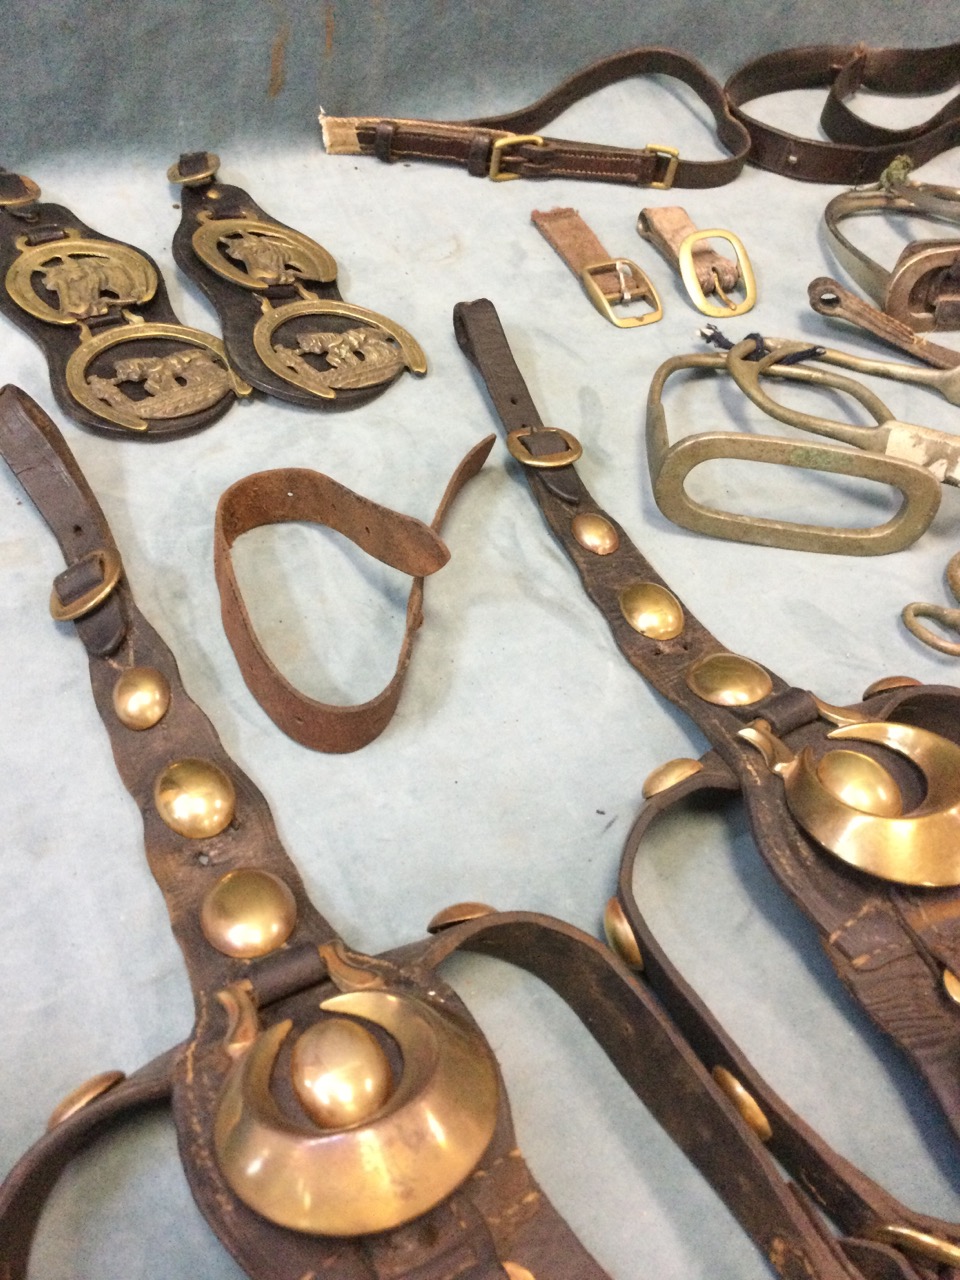 Miscellaneous horse tack - bits, pairs of stirrups - one dated 1914, straps/belts, horse brasses - Image 2 of 3